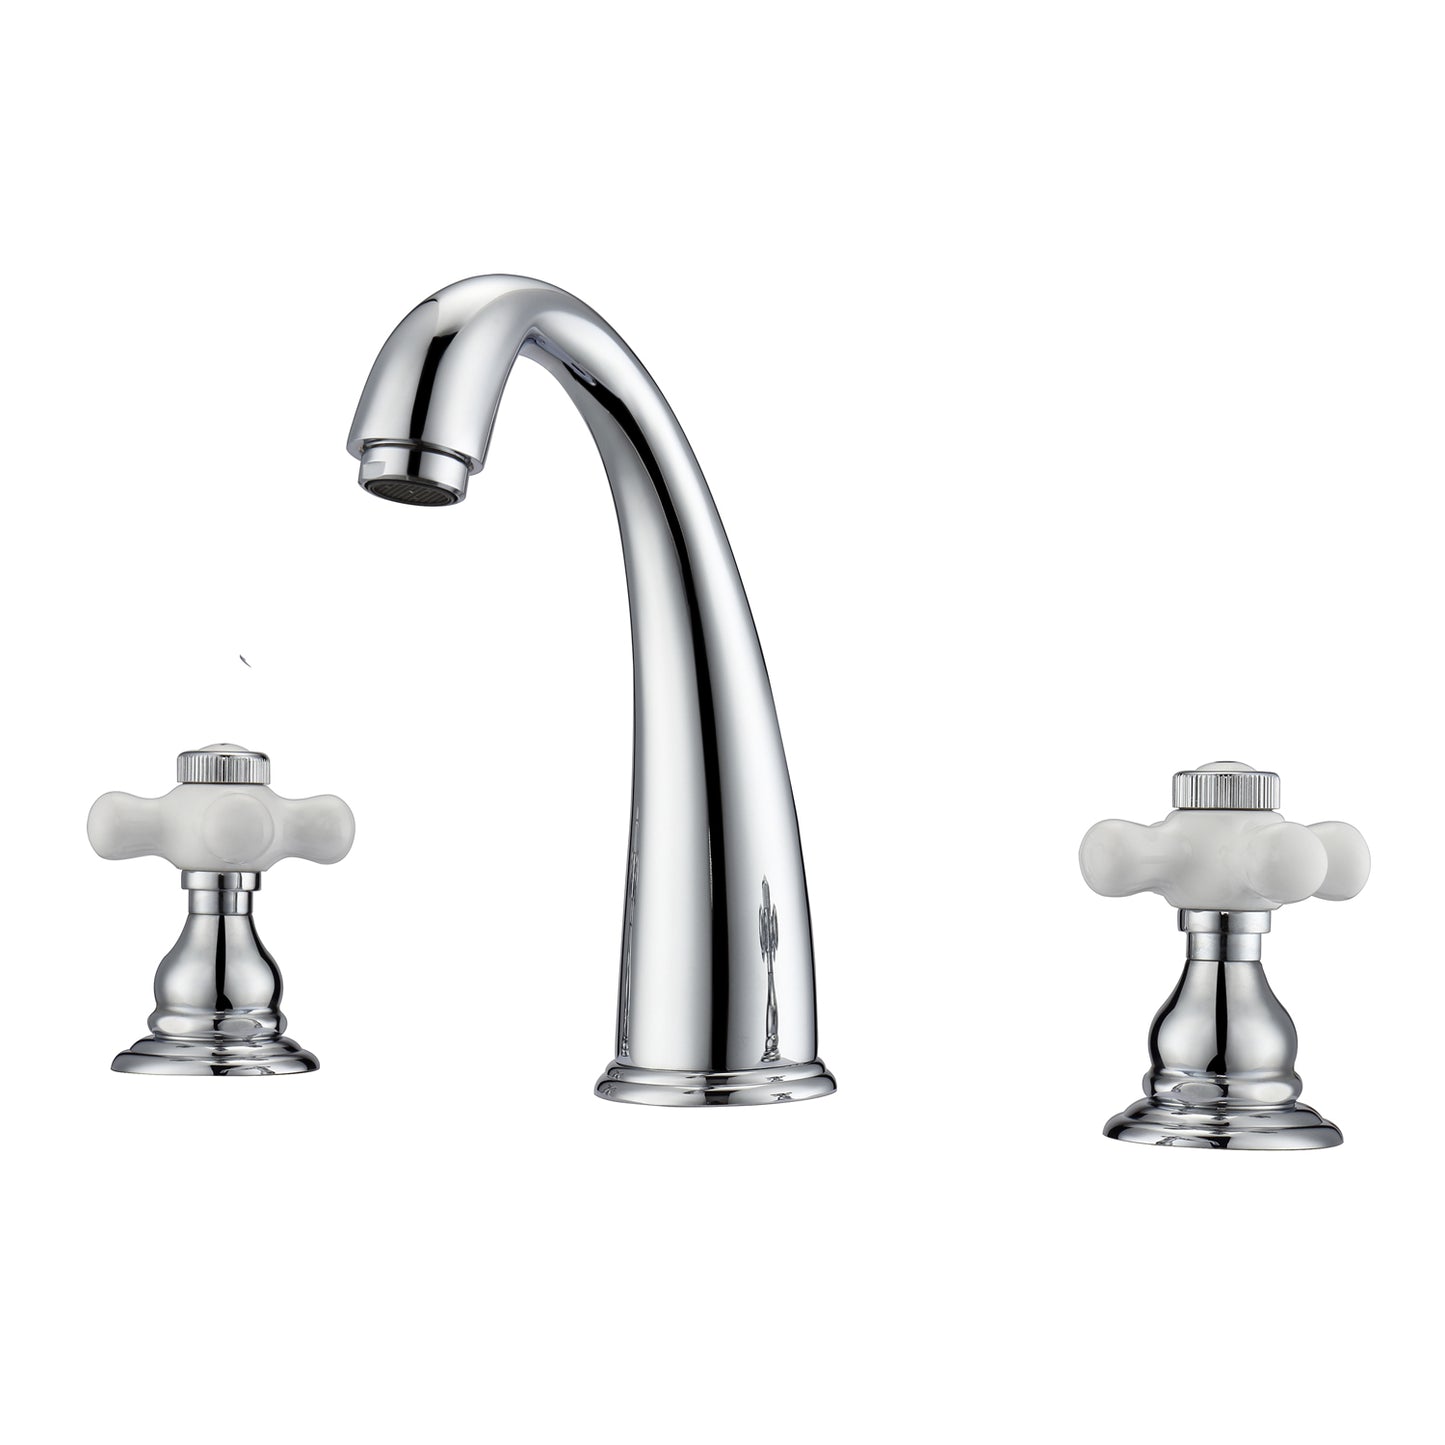 Maddox 8" Widespread Chrome Bathroom Faucet with Porcelain Cross Handles